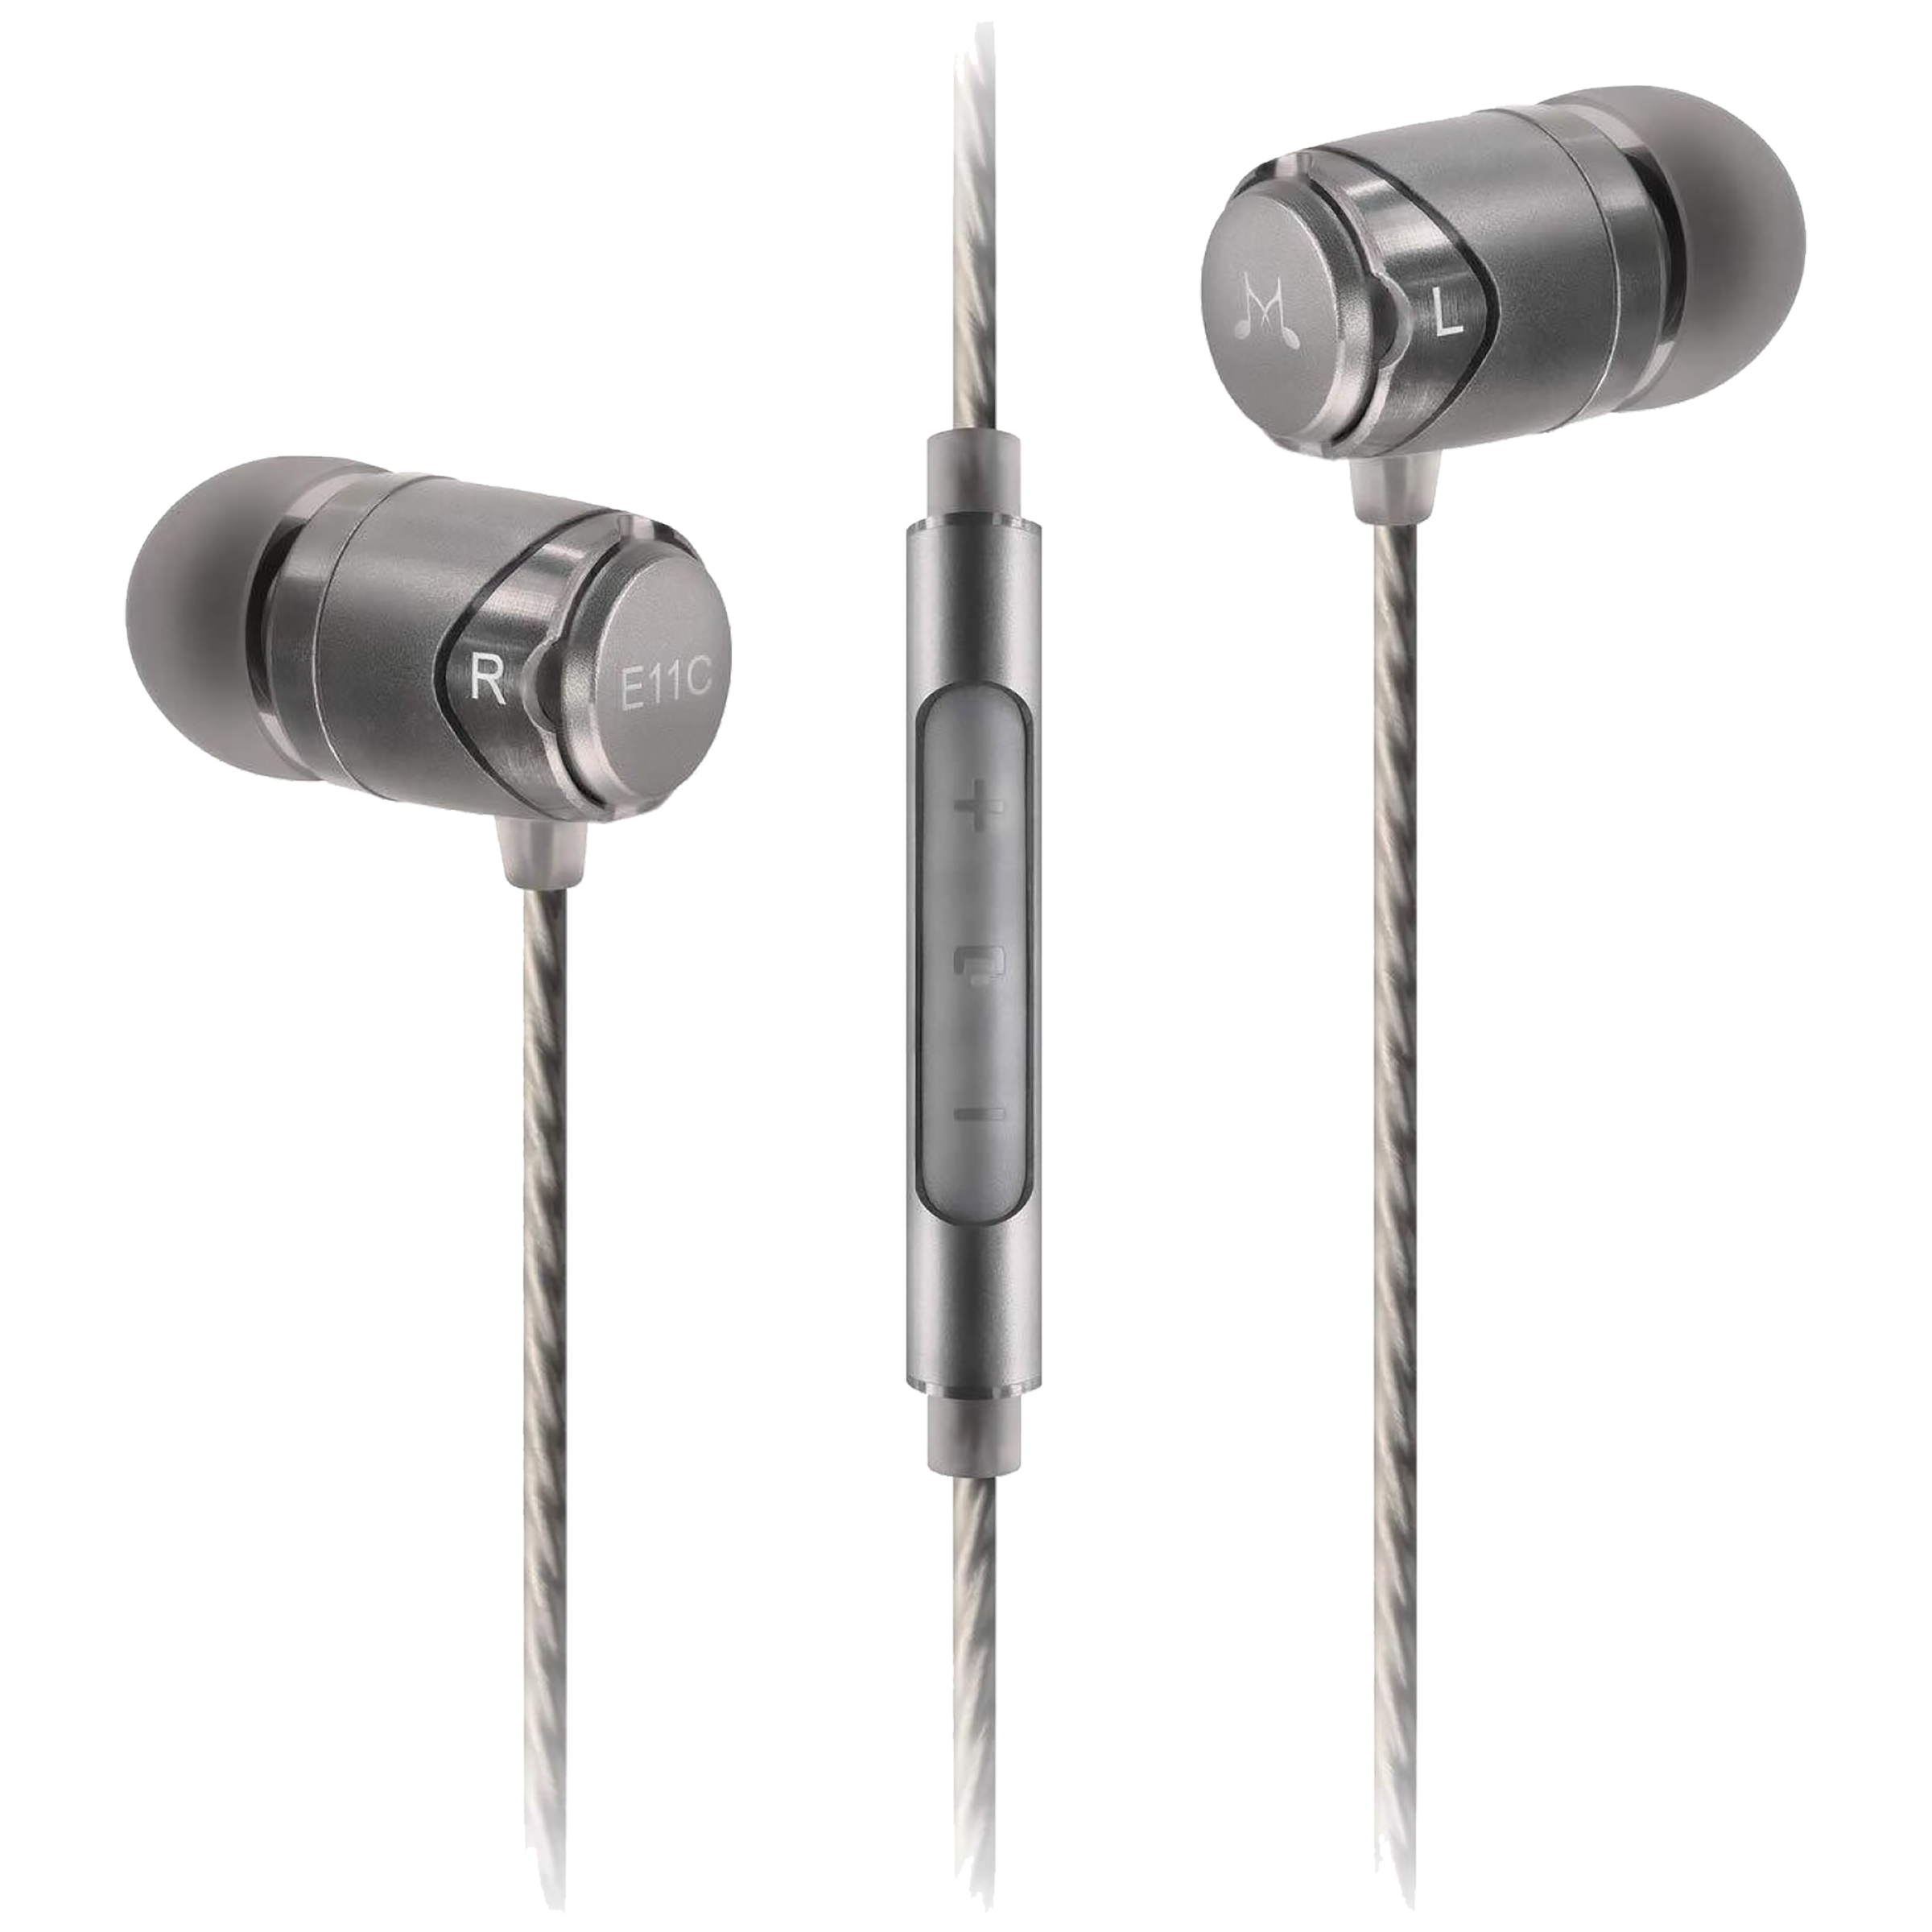 SoundMAGIC E11C In-Ear Noise Isolation Wired Earphone with Mic (Sophisticated Sound, Gunmetal)_1